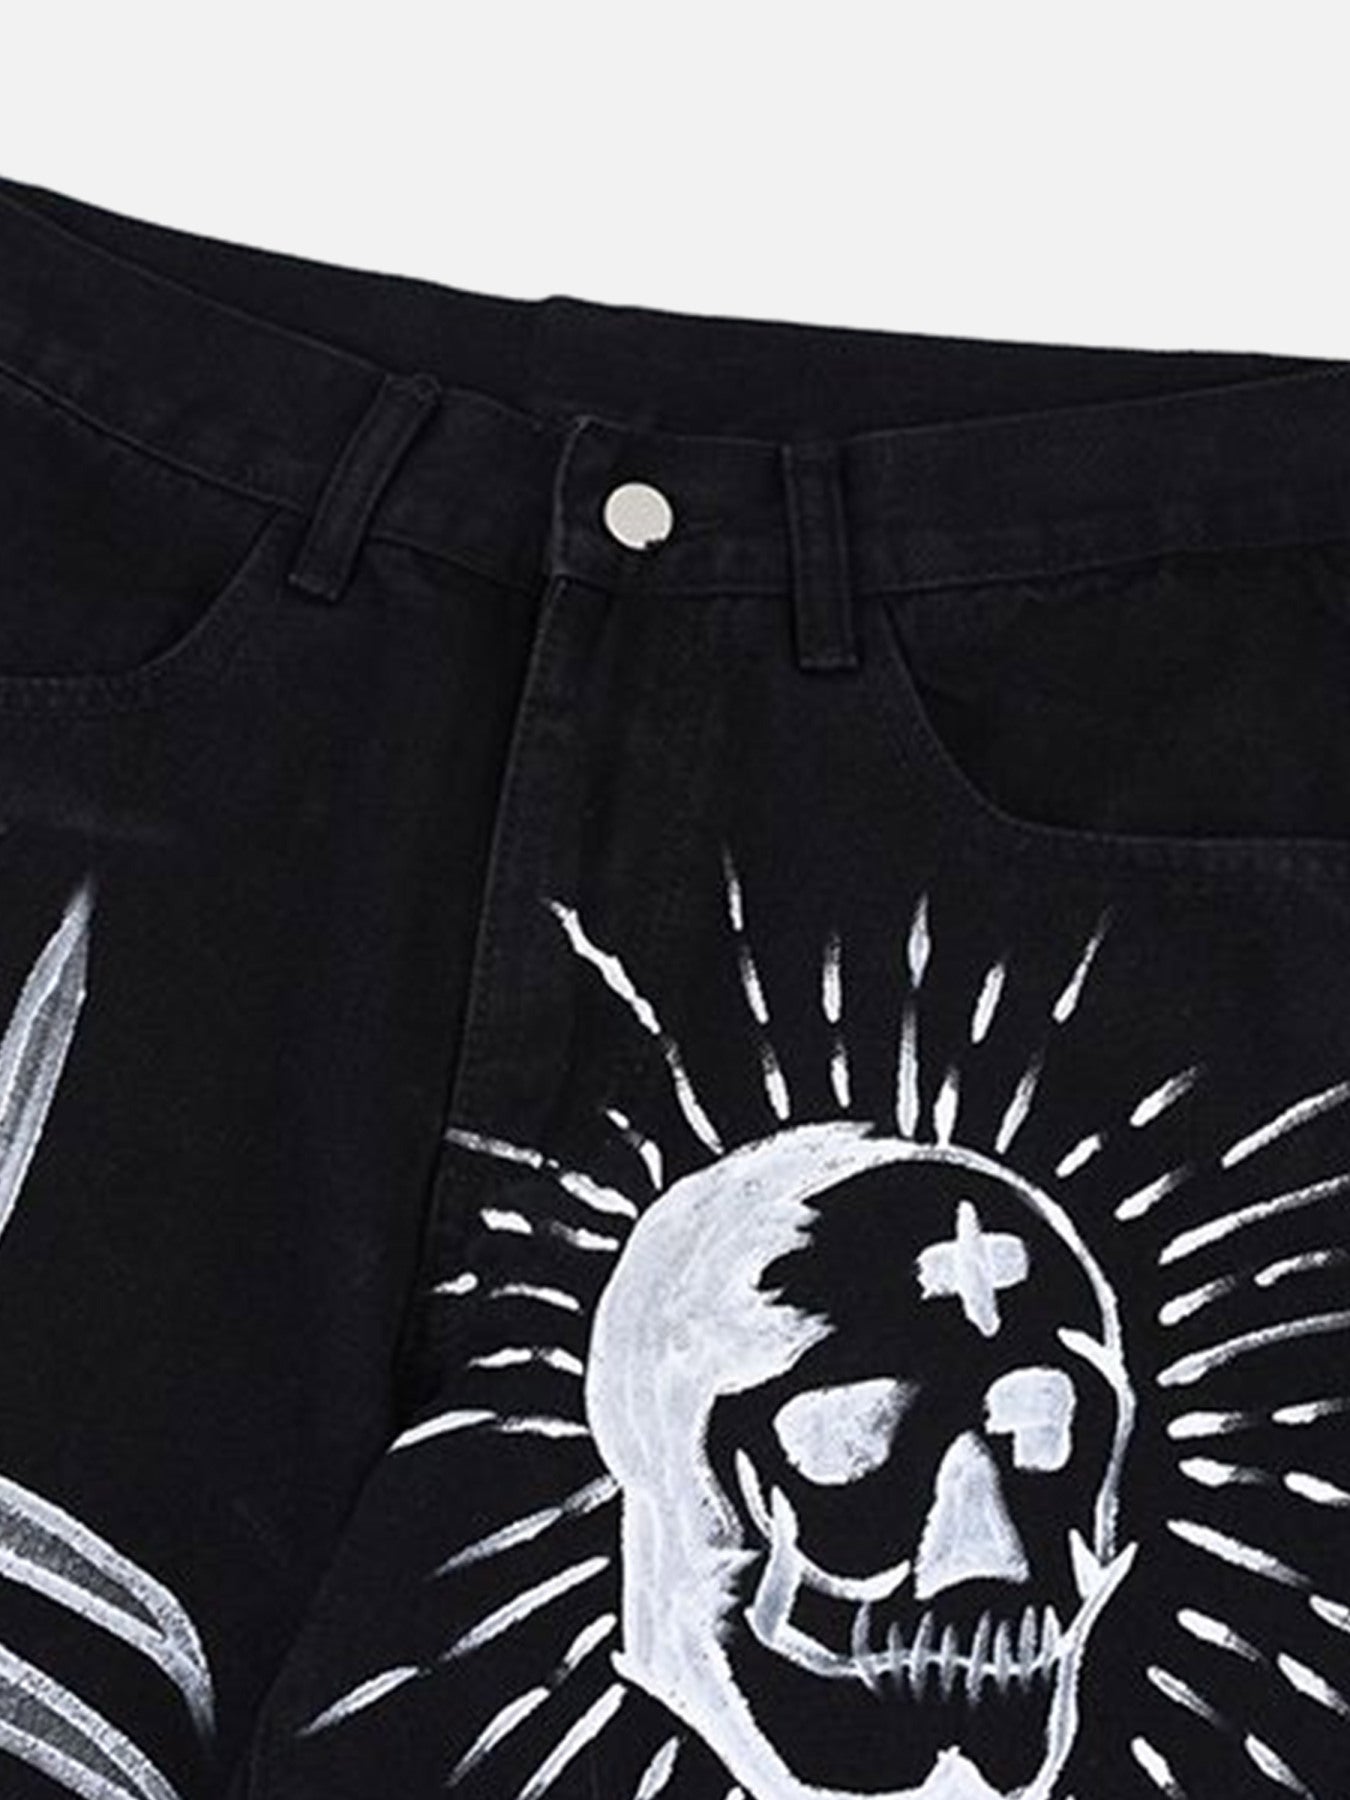 The Supermade Skull Centipede Print Casual Stretch Pants